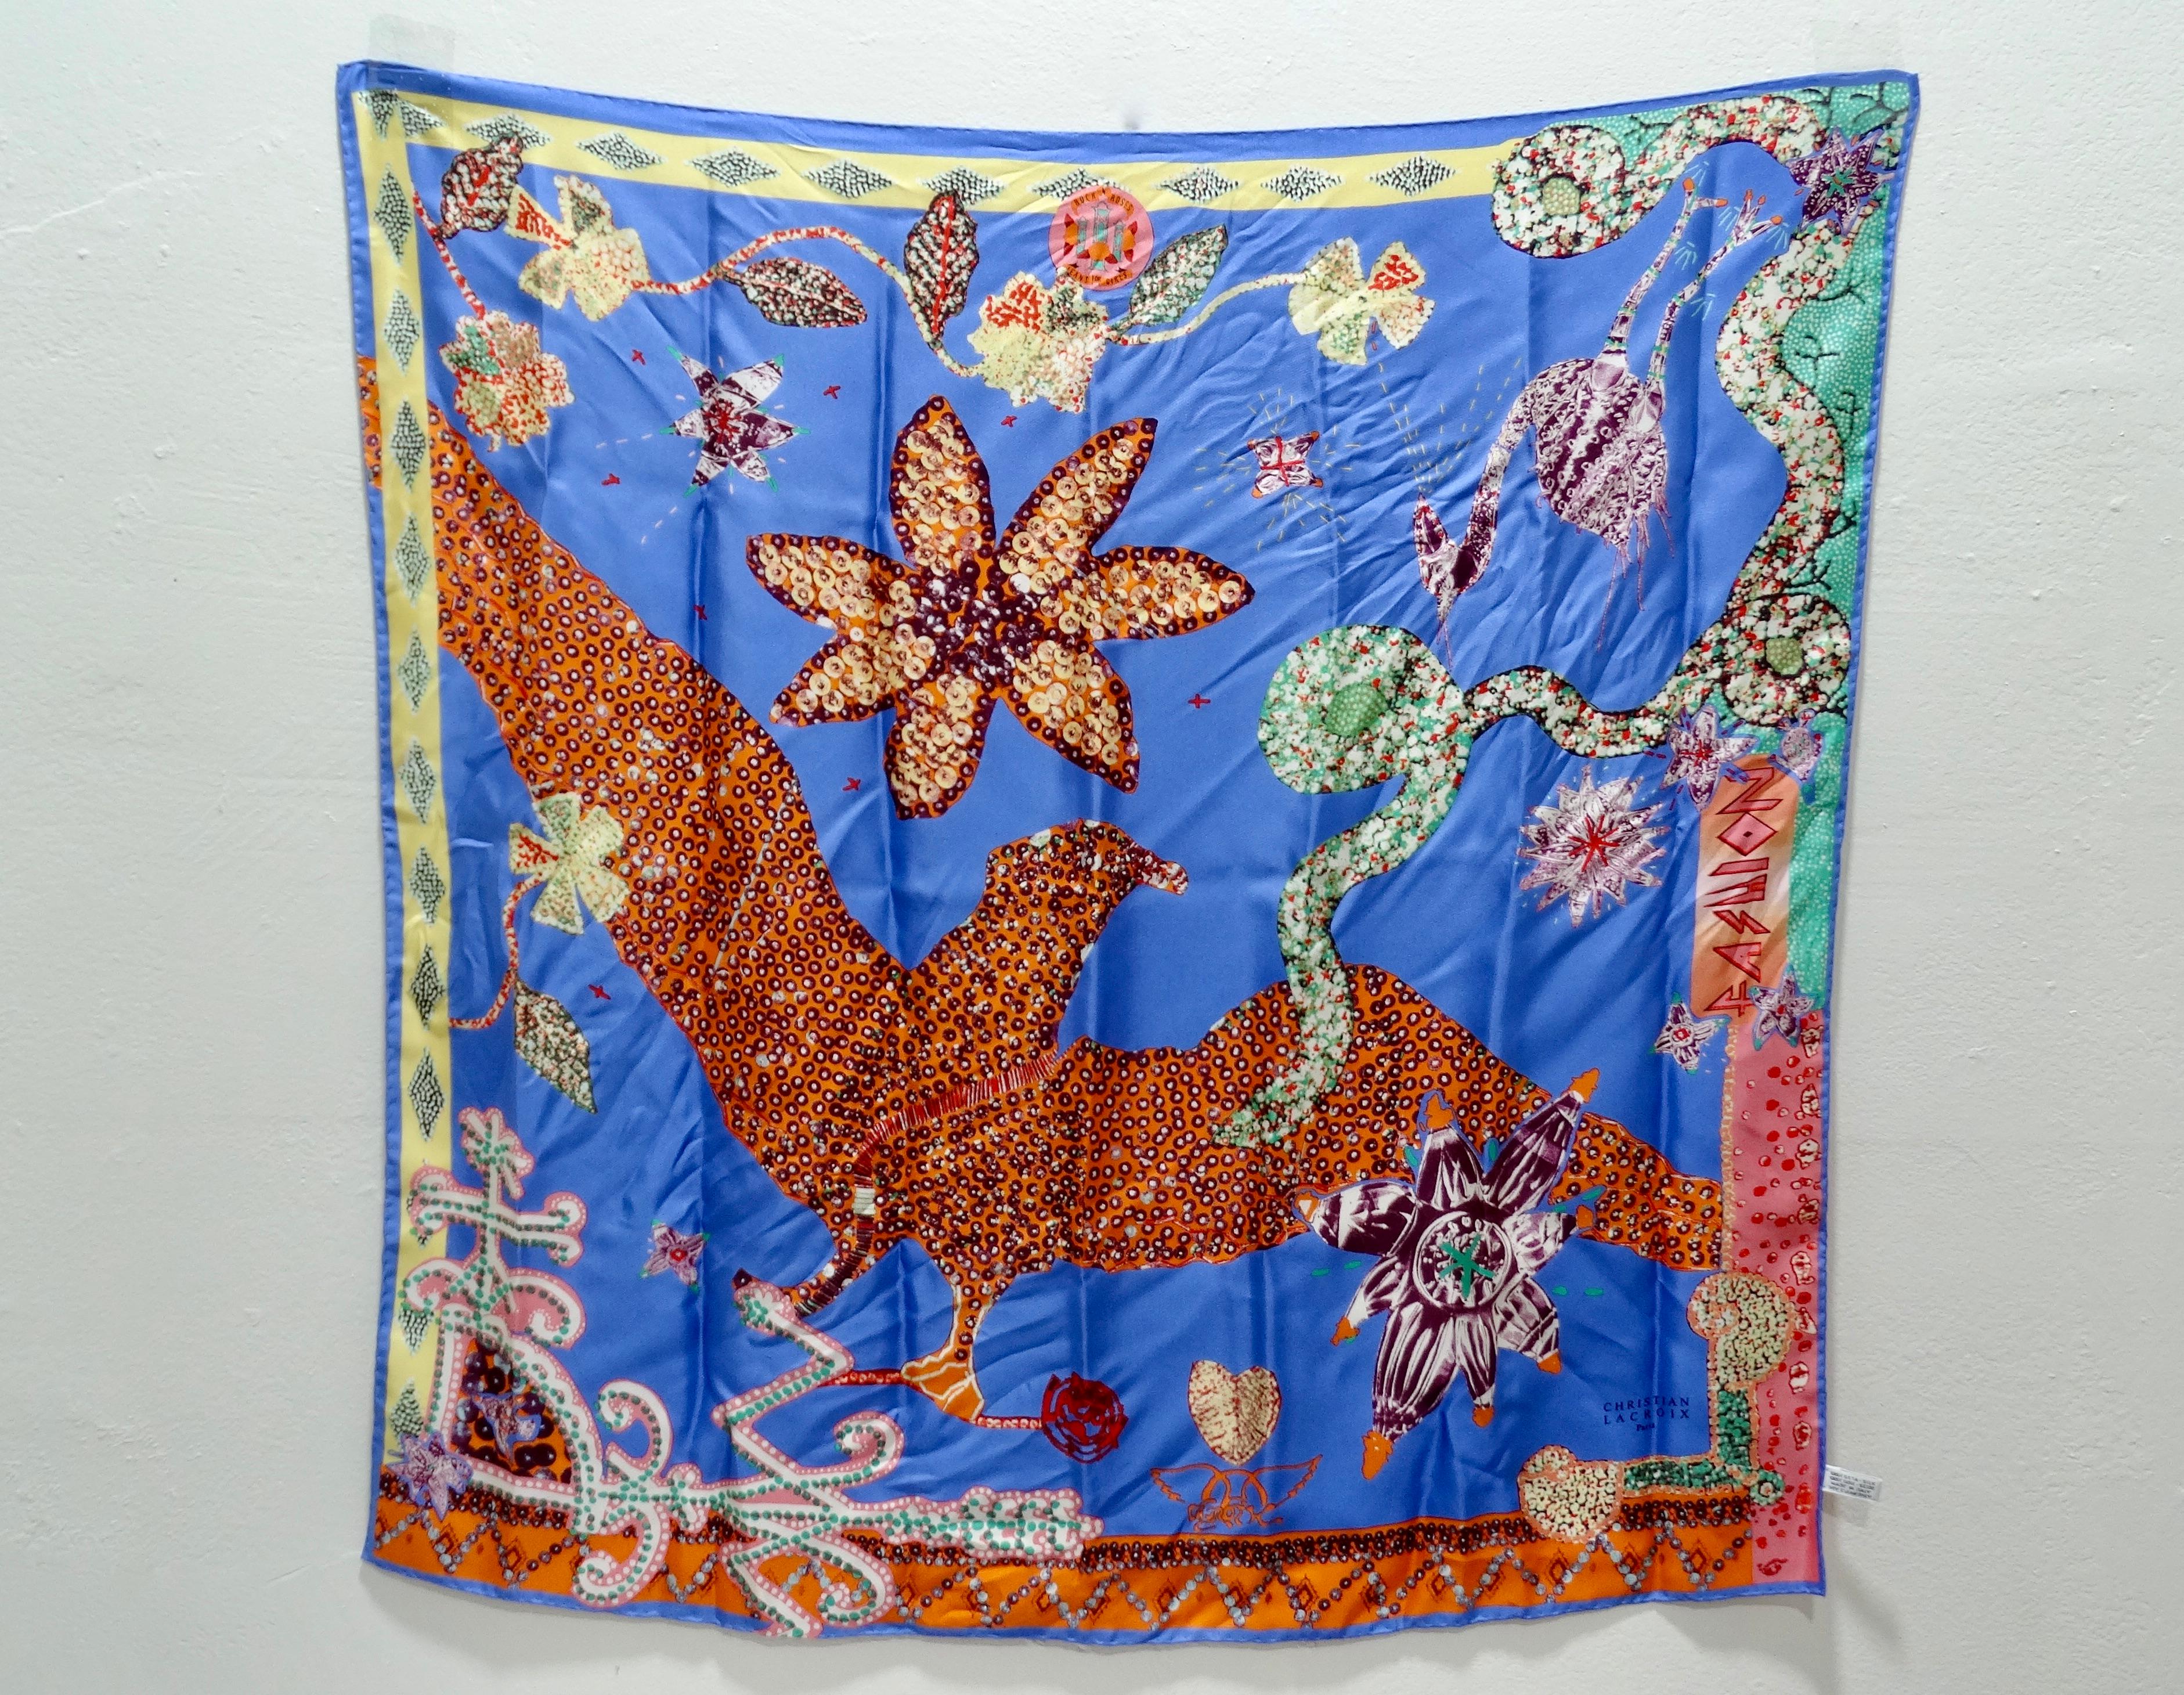 Your new favorite scarf is here! Circa late 1980s/early 1990s, this silk scarf features a printed sequin bird motif decorated with flowers, hearts and other designs. Printed on the side is 'Fashion' in a pink font. Rare and timeless, this vintage